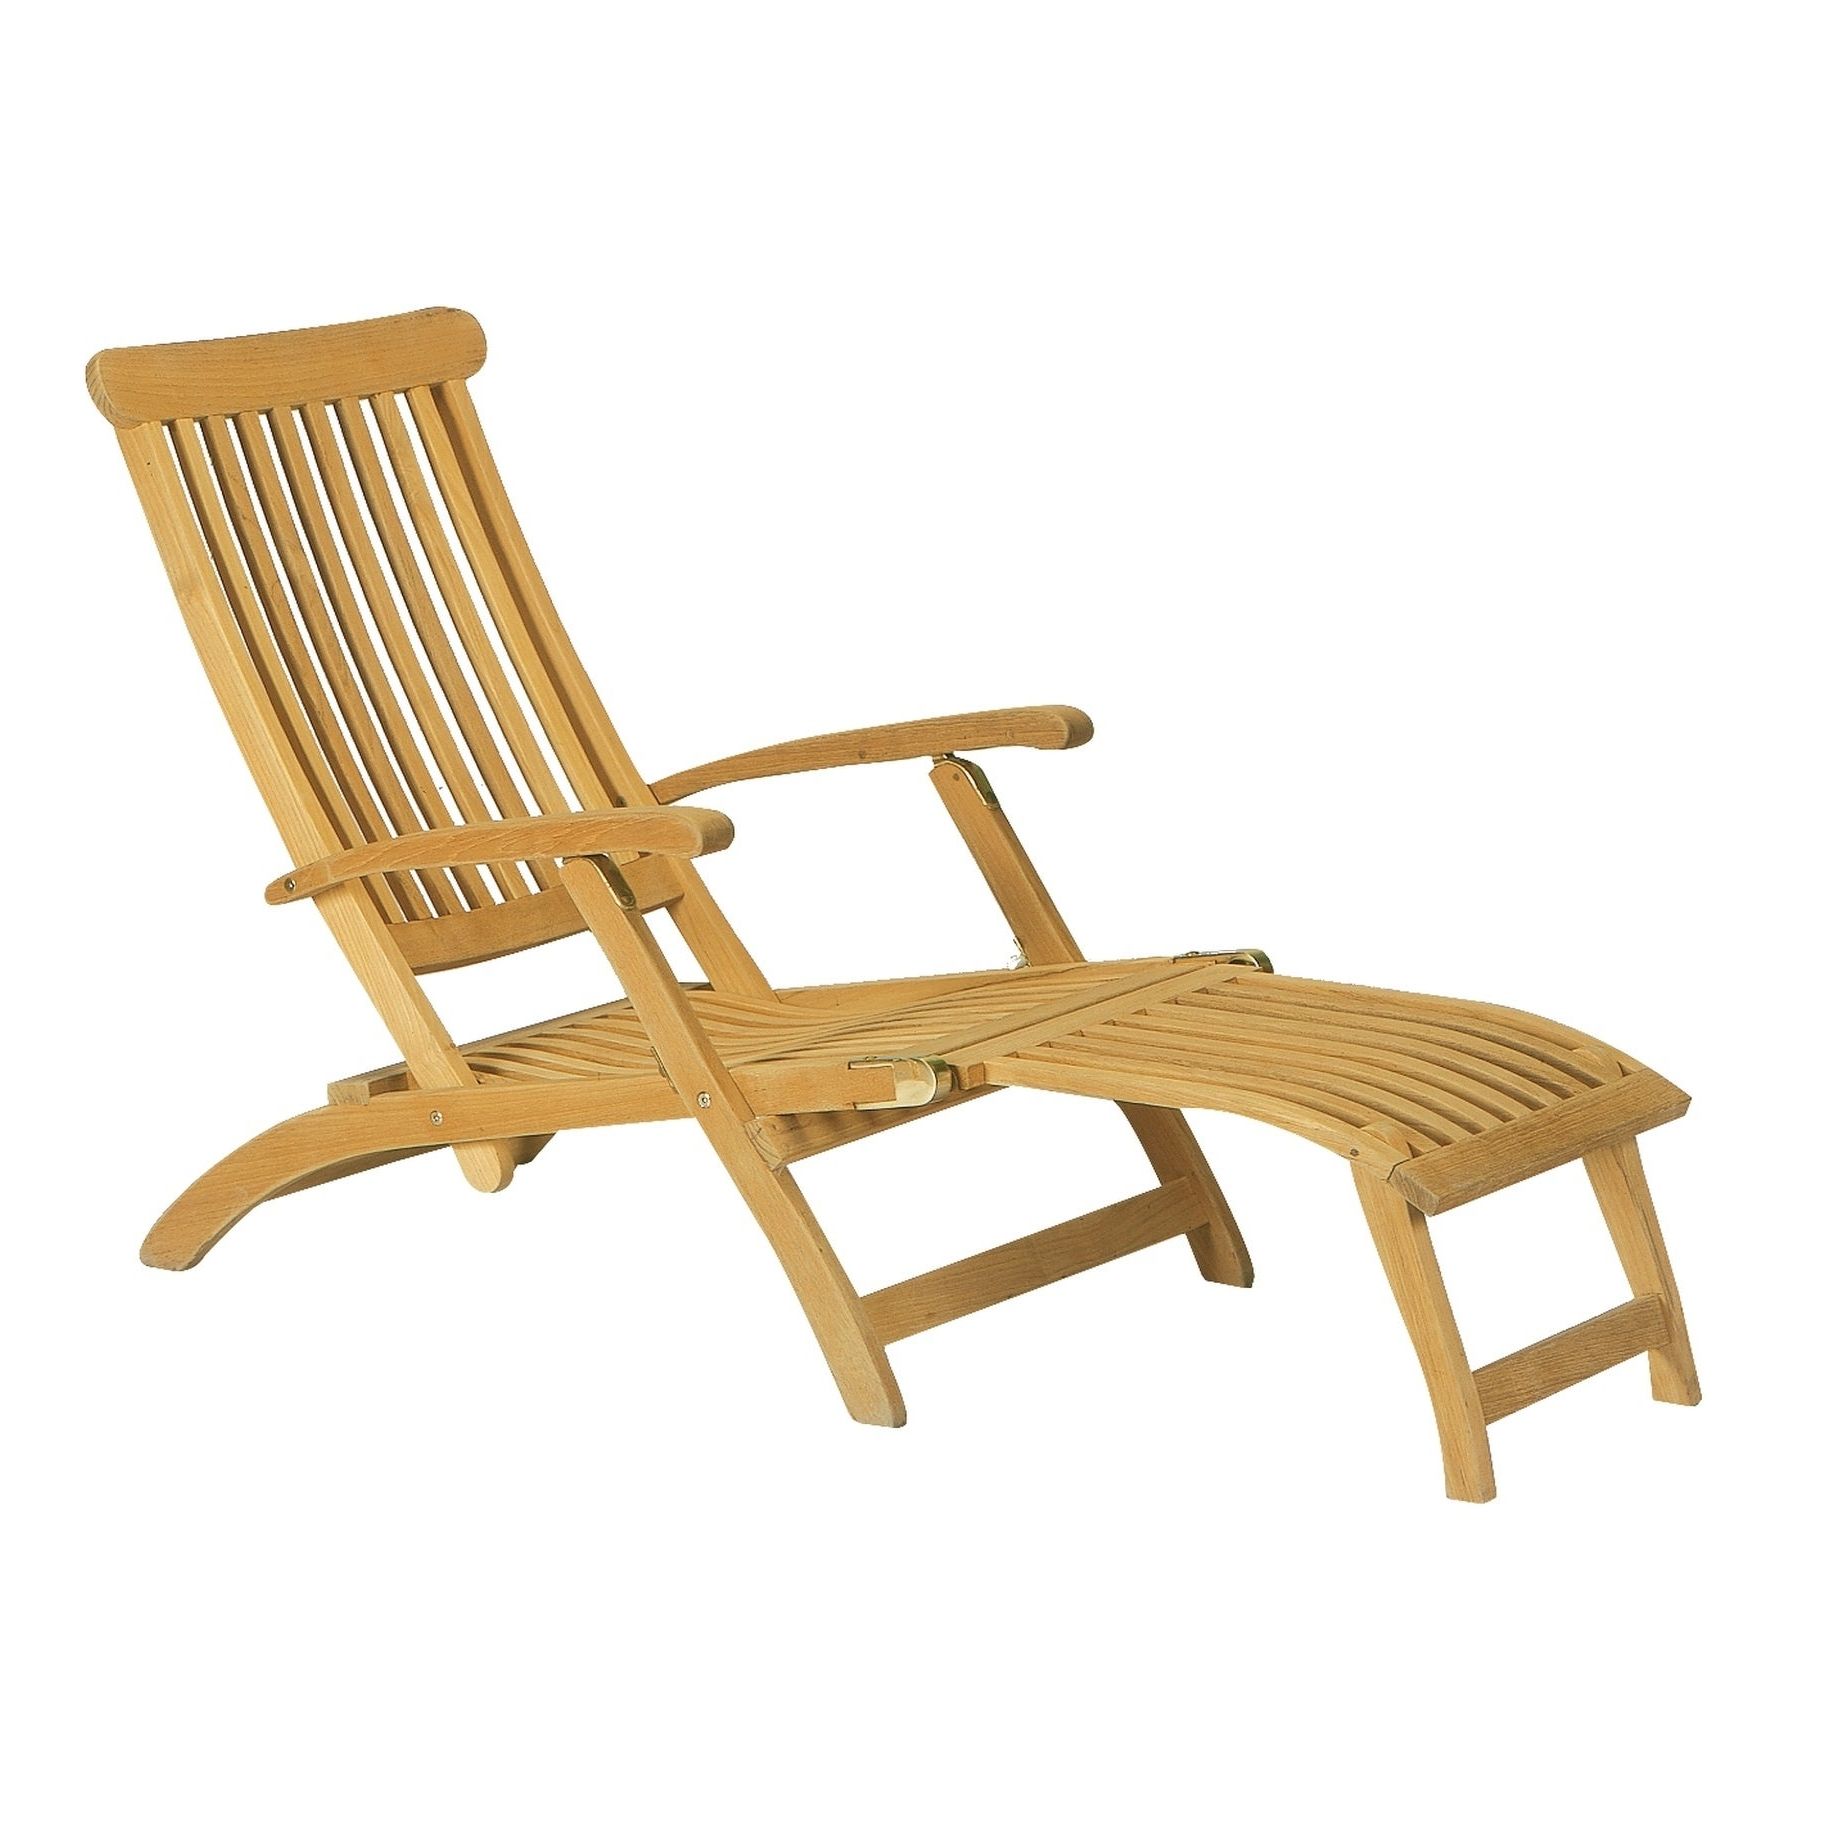 Steamer Outdoor Folding Teak Chaise Lounge Chair For Current International Caravan Royal Fiji Multi Position Steamer Deck Loungers (View 17 of 25)